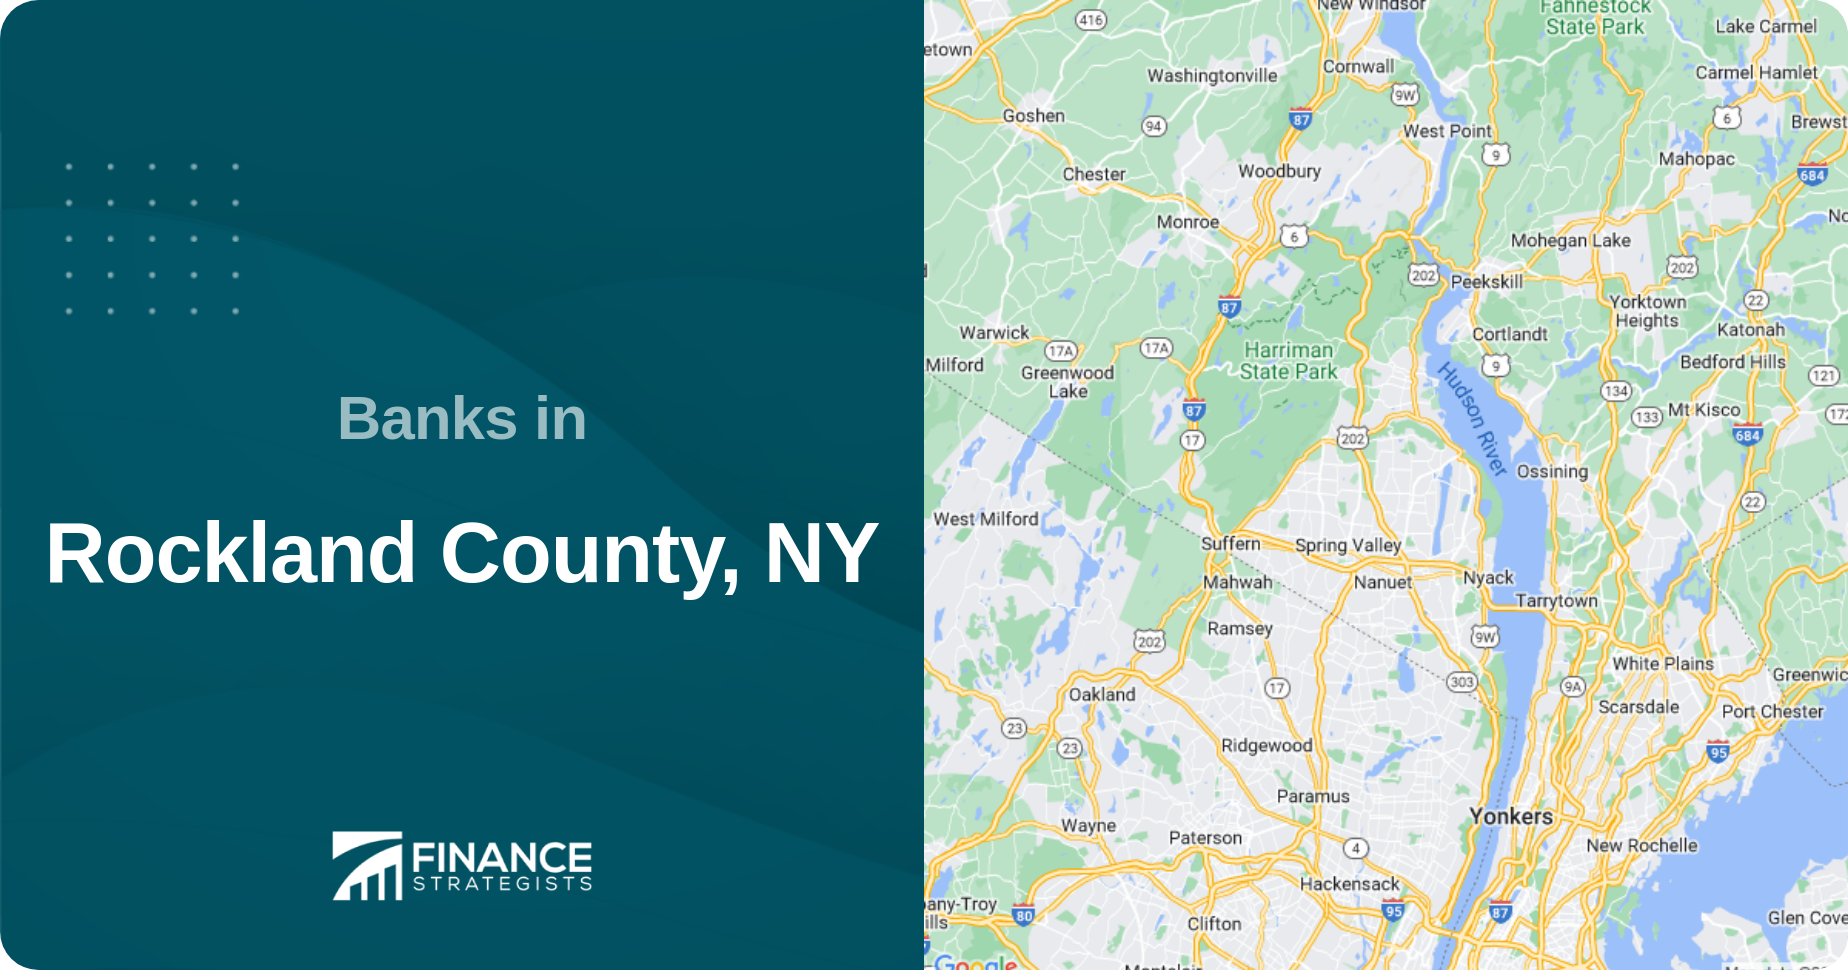 Banks in Rockland County, NY